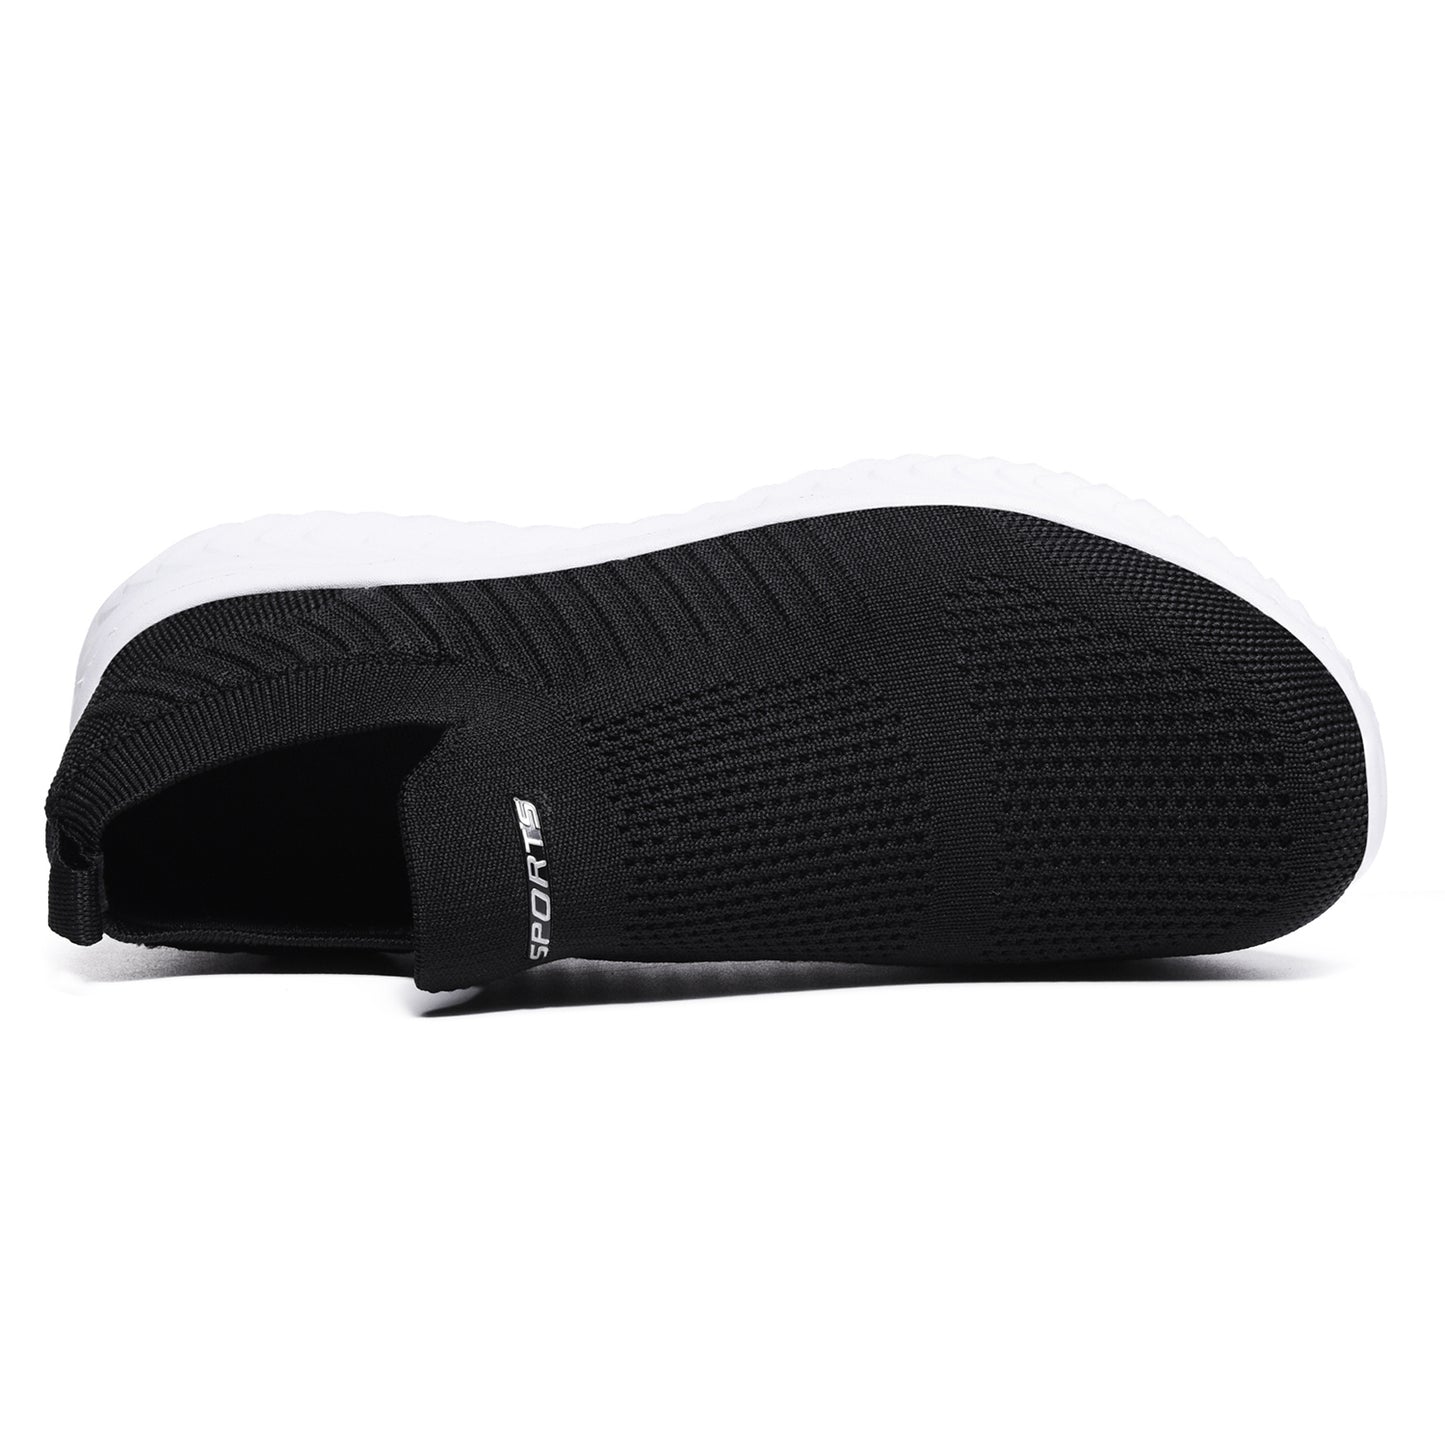 Shoes   Men   Sneakers   Men   Comfortable   Slip   On   Casual   Lazy